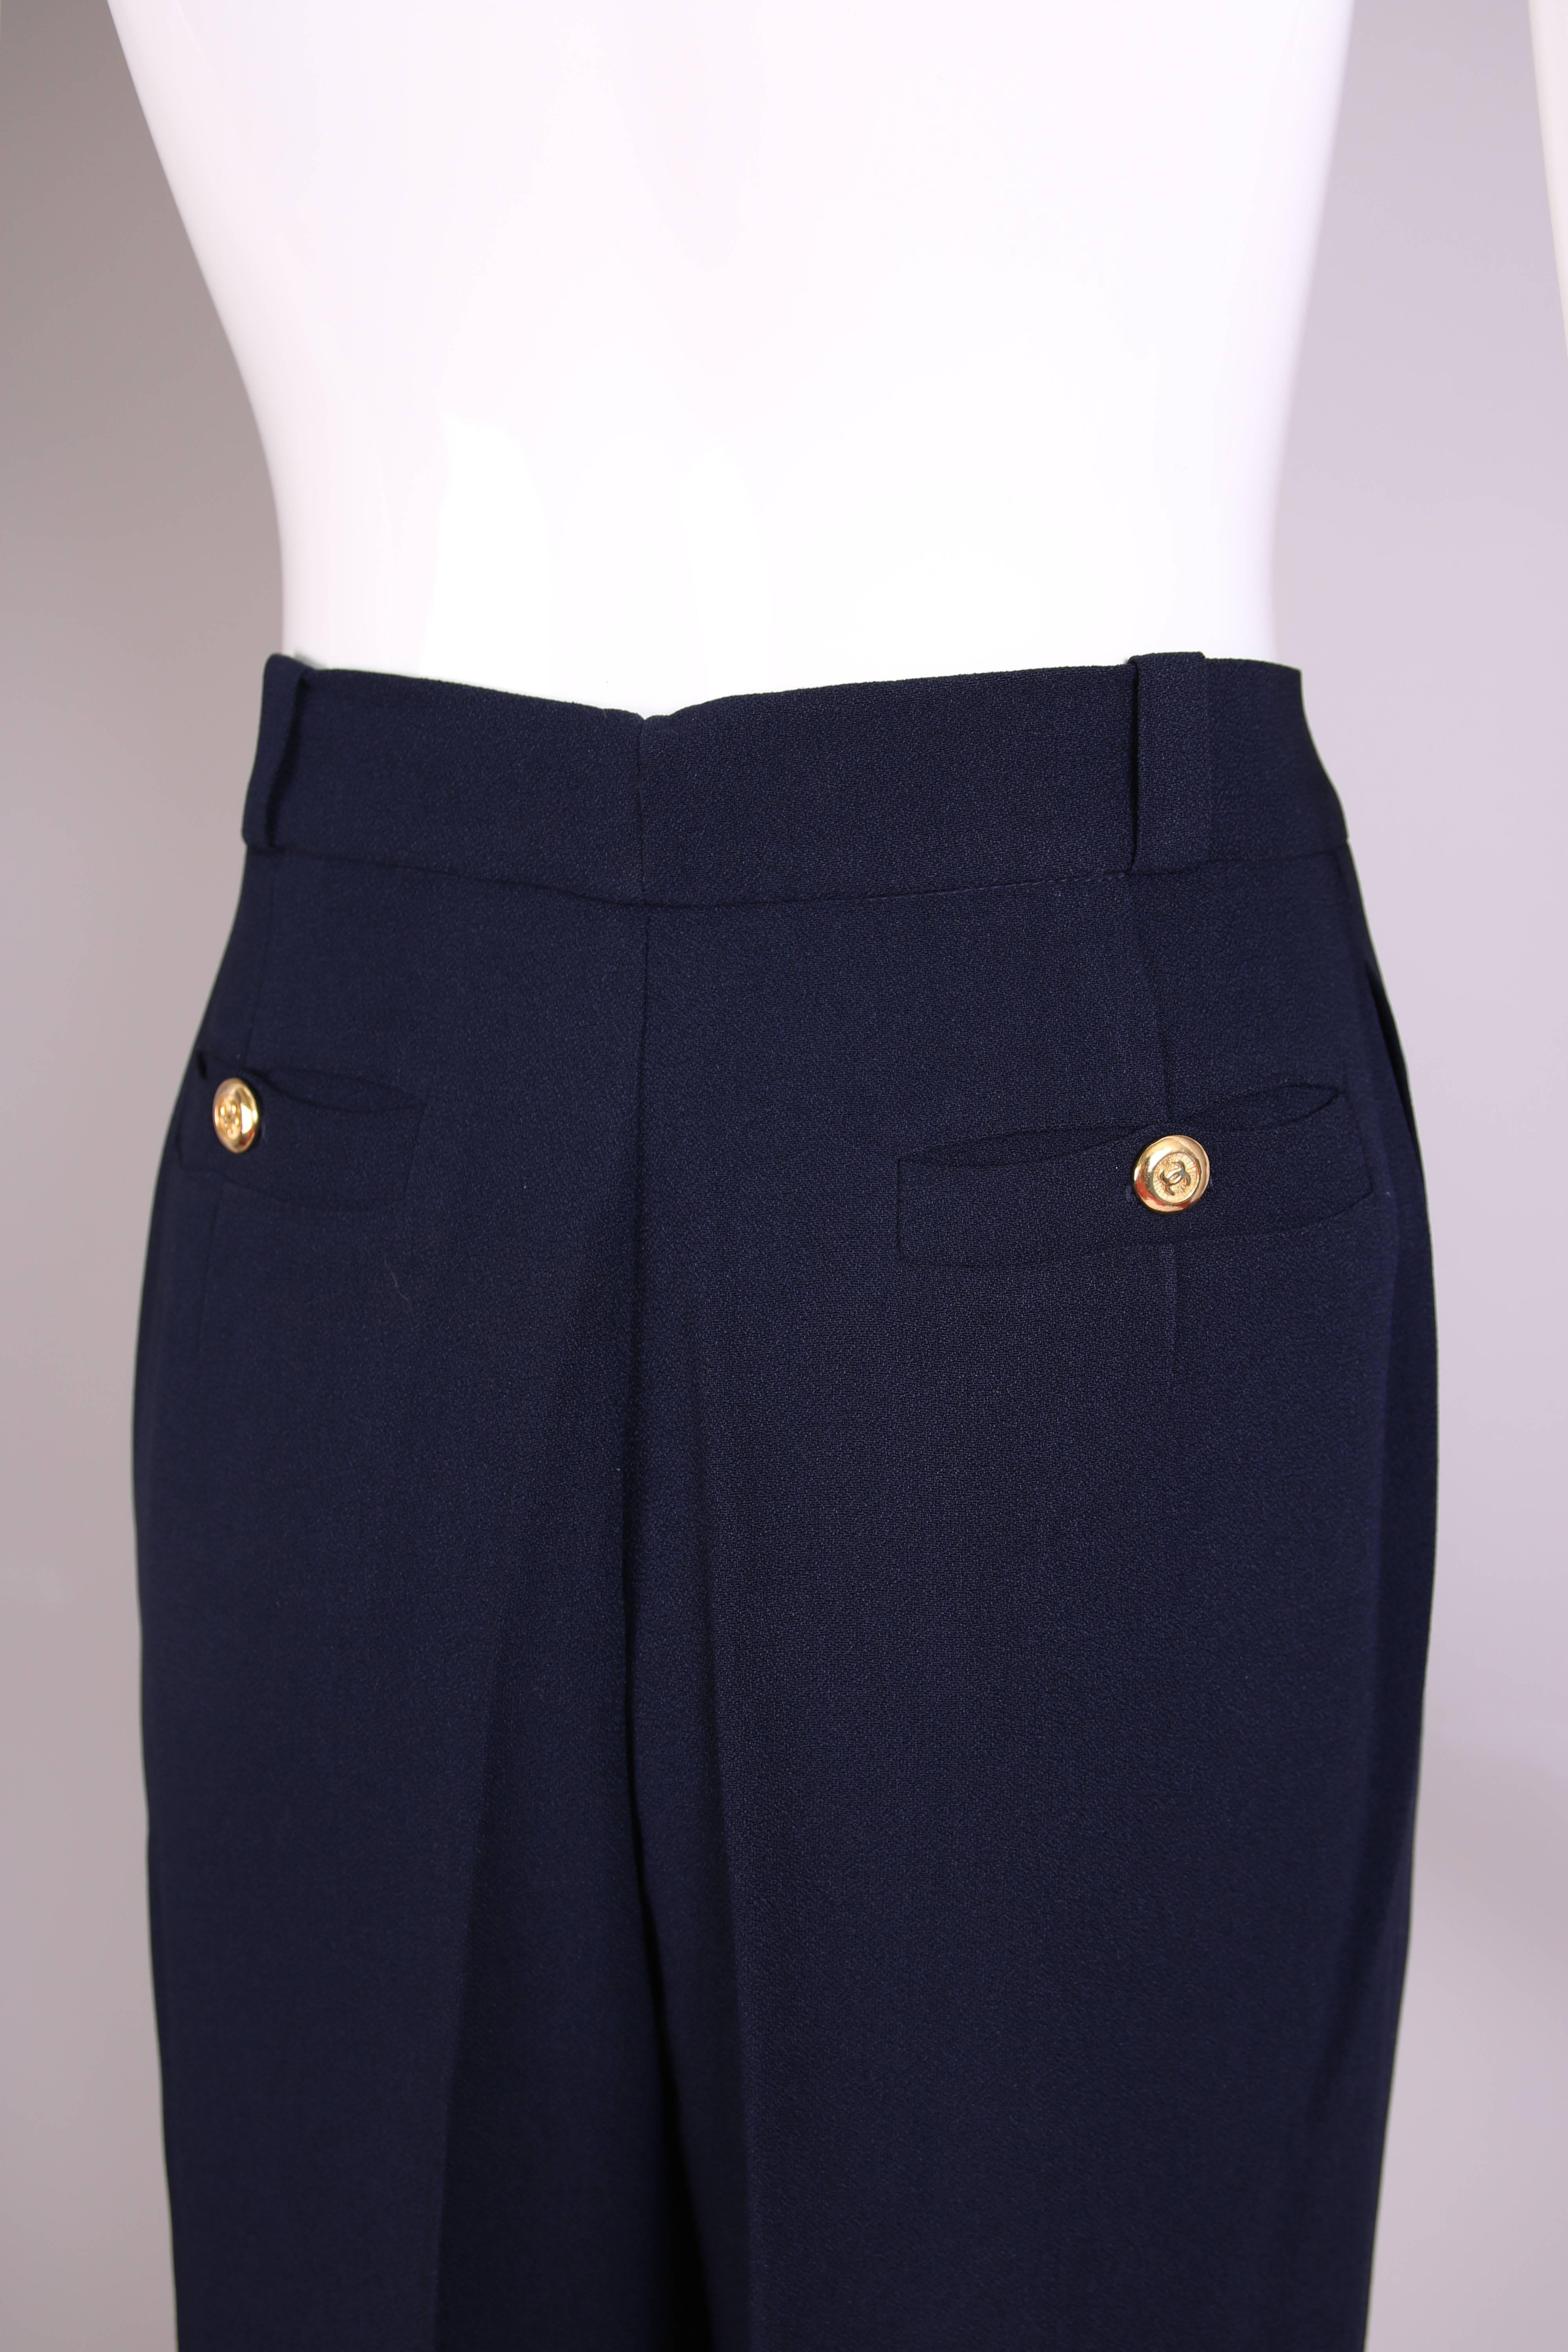 Chanel Navy Crepe High-Waist Trousers  2